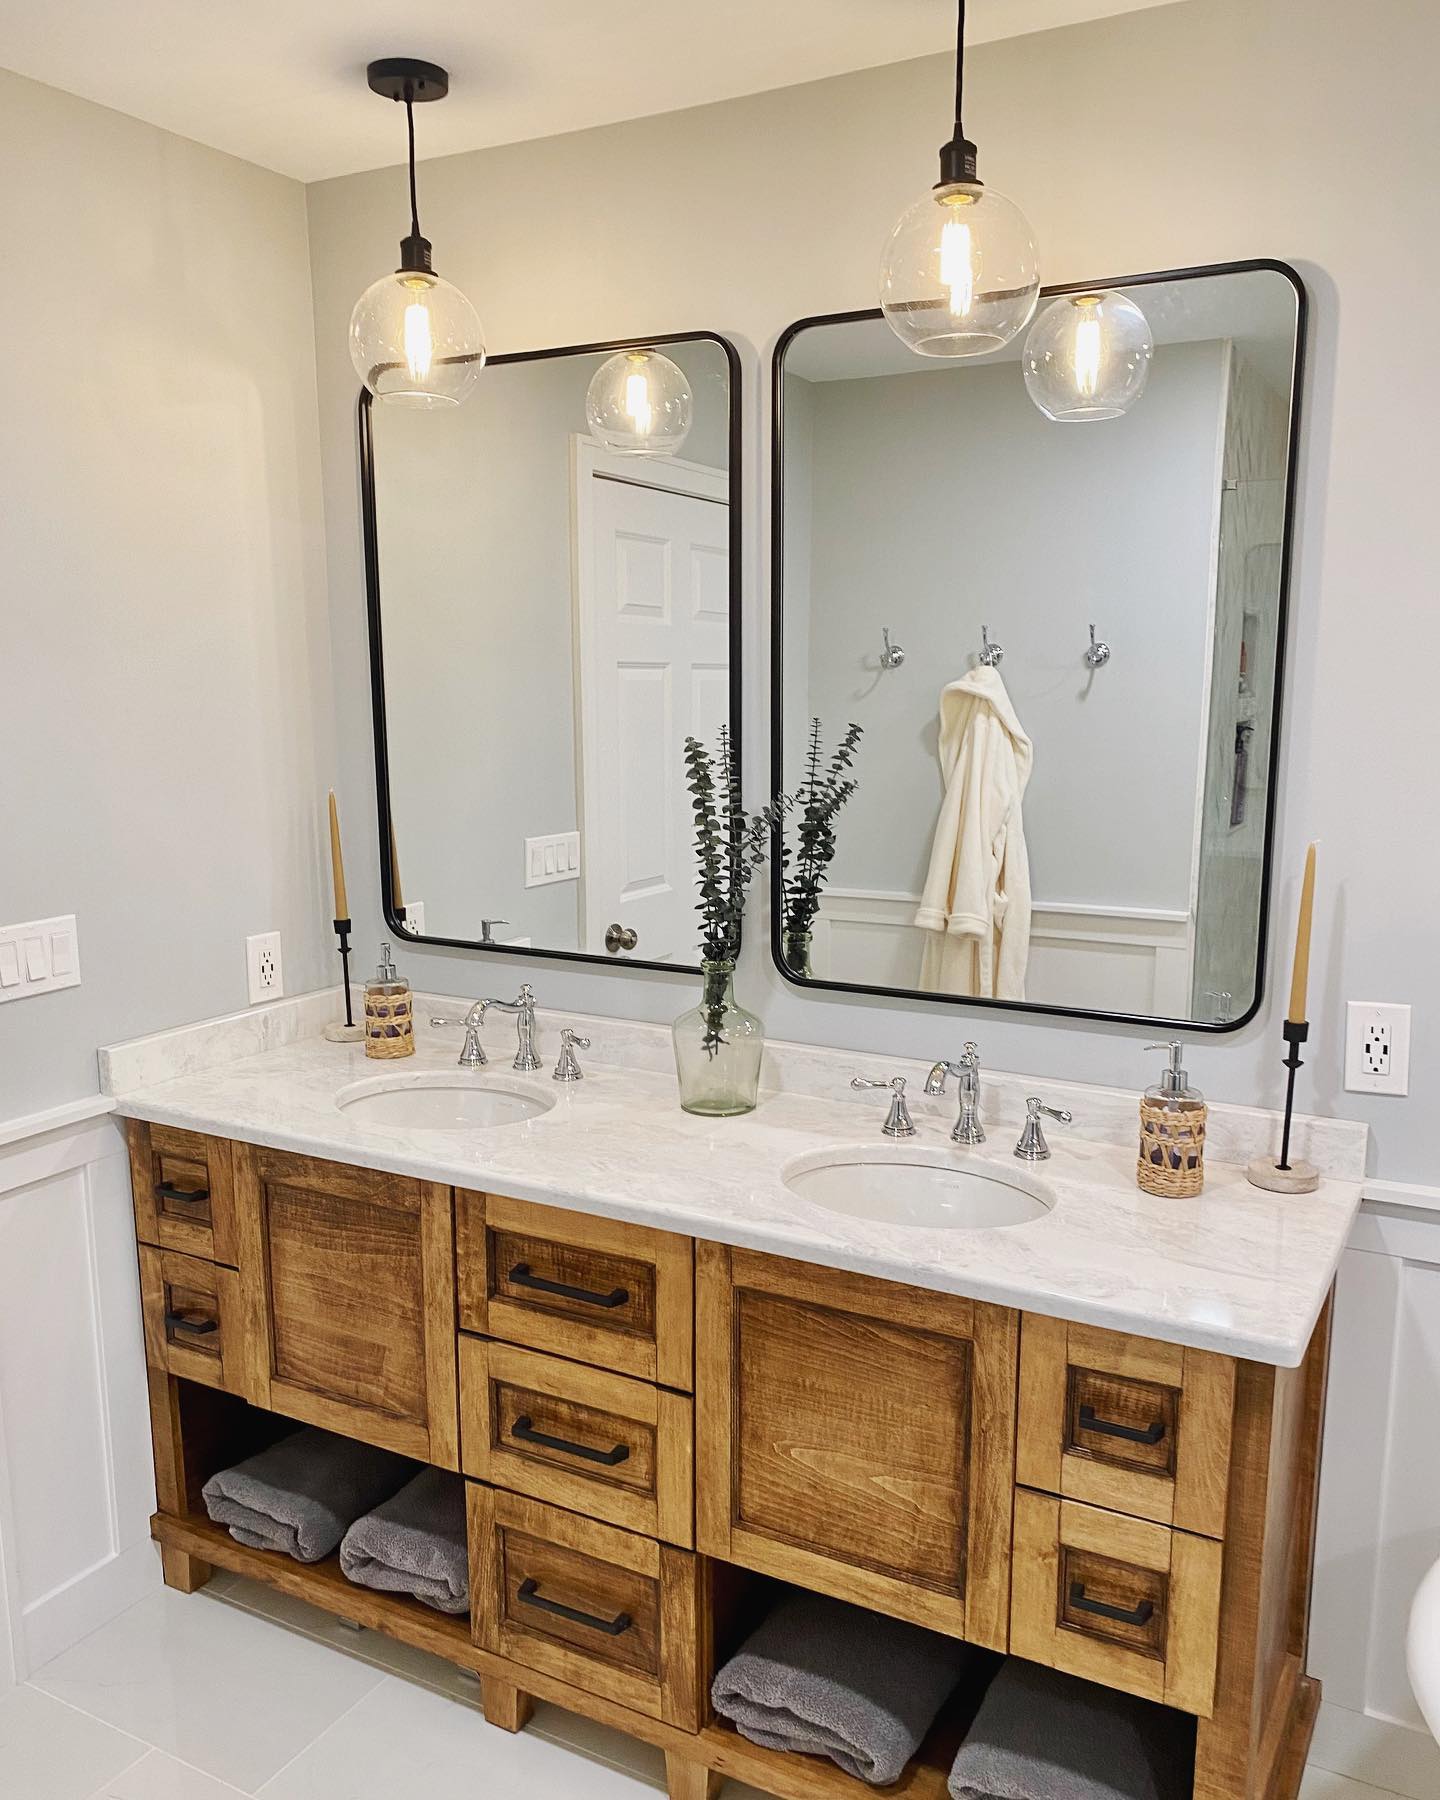 A modern bathroom vanity with a double sink, wooden cabinetry, two mirrors, pendant lights, and a central vase with green foliage. Rolled towels are stored below the sink.